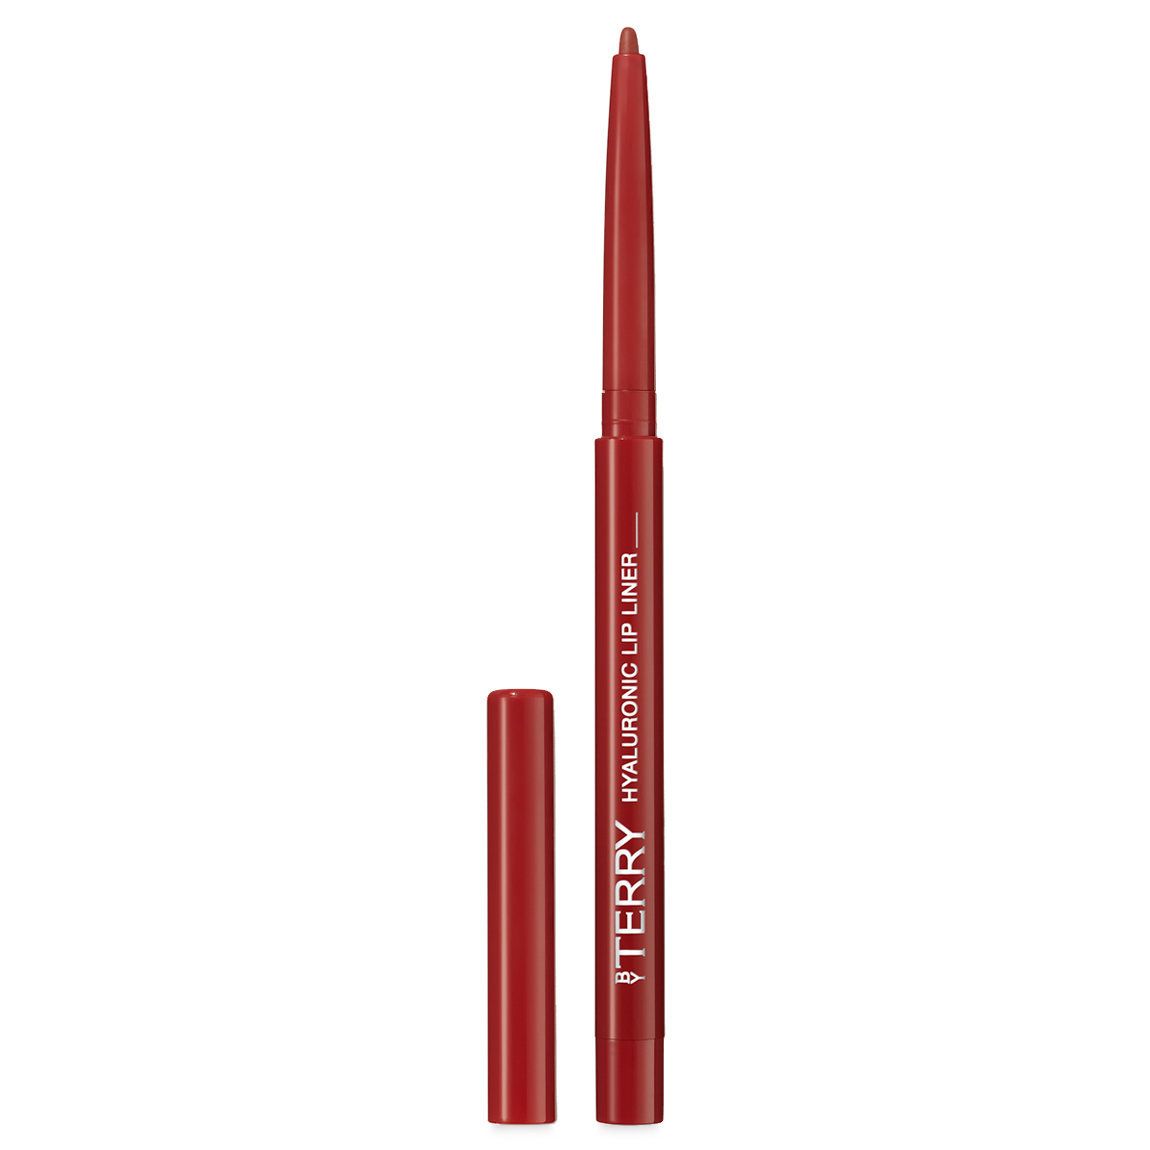 BY TERRY Hyaluronic Lip Liner Love Affair | Beautylish